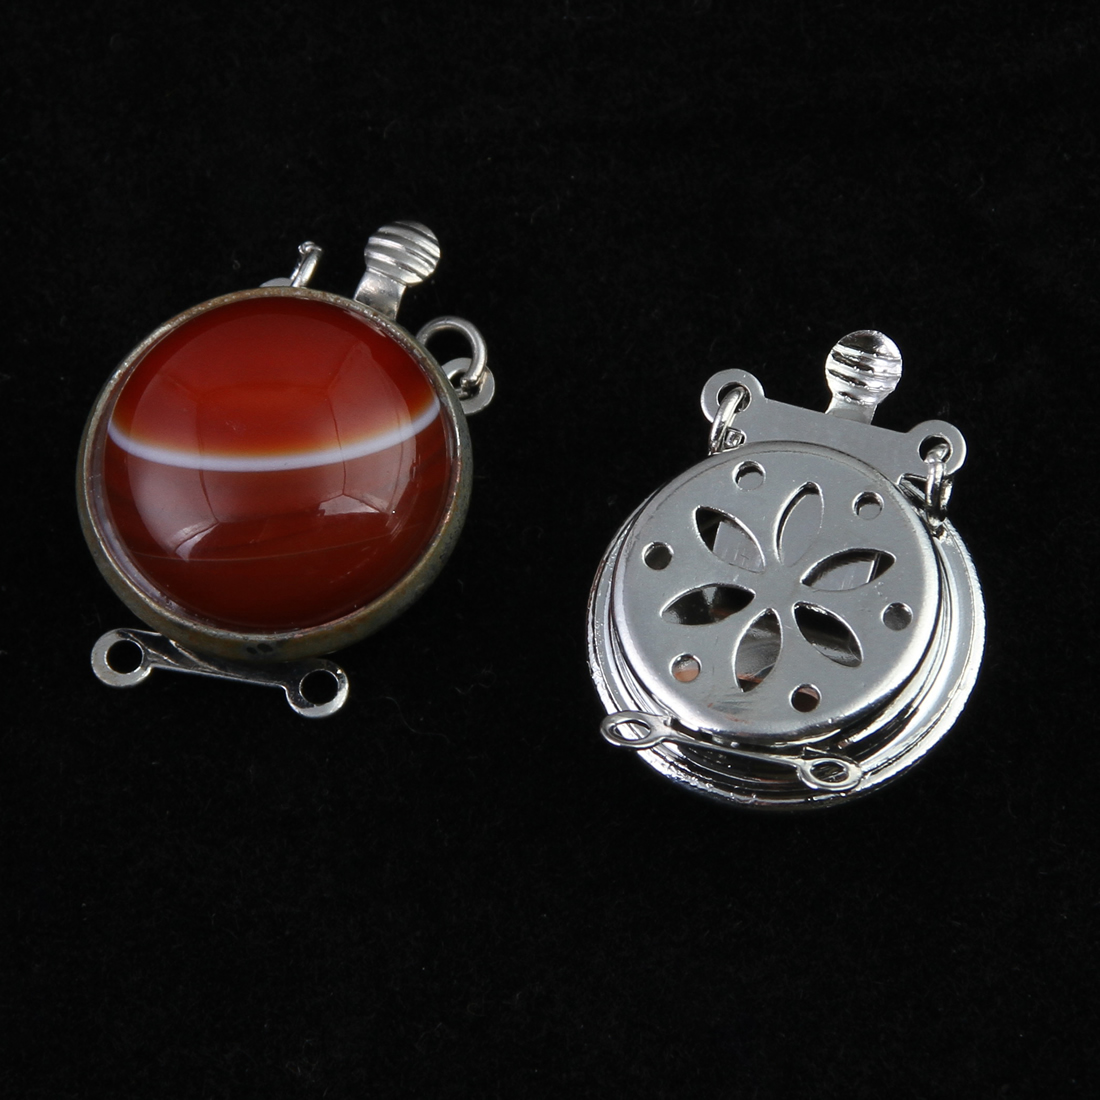 7:Red Agate